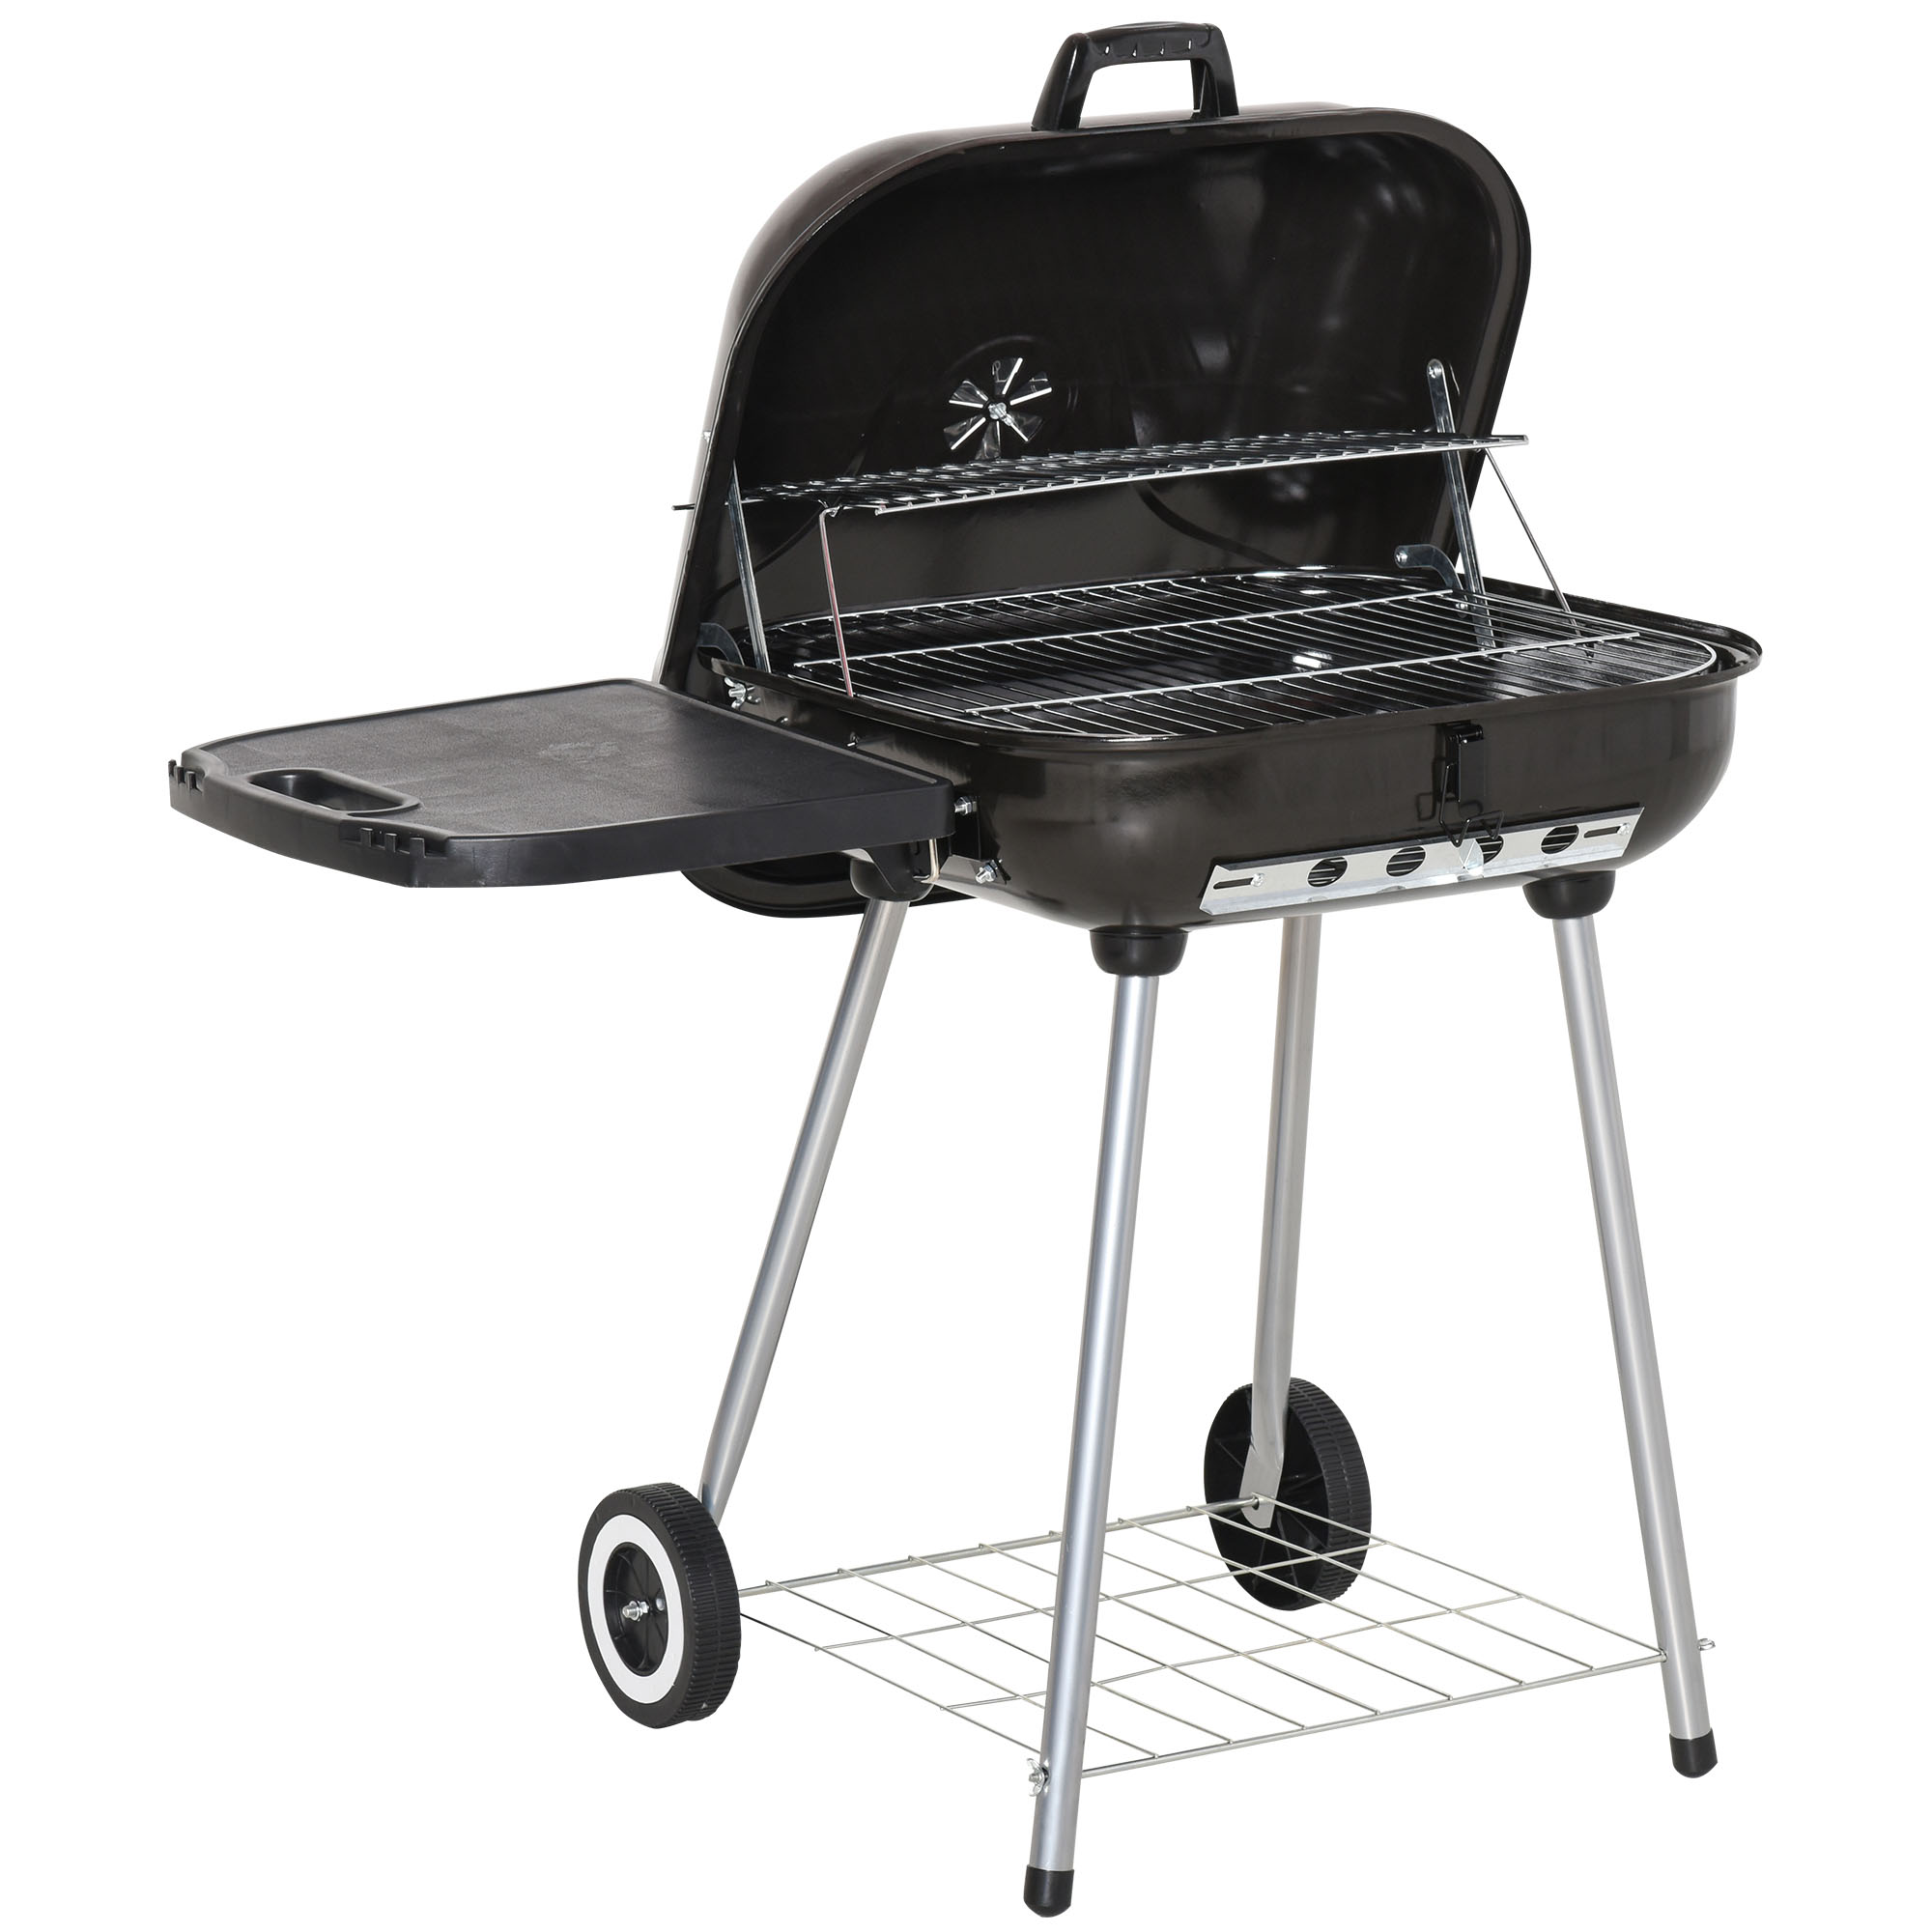 Outsunny Portable Charcoal Bbq Grill 2 Burner Garden Barbecue Trolley W/ Wheels Cooking Heat Control Shelves Smoker